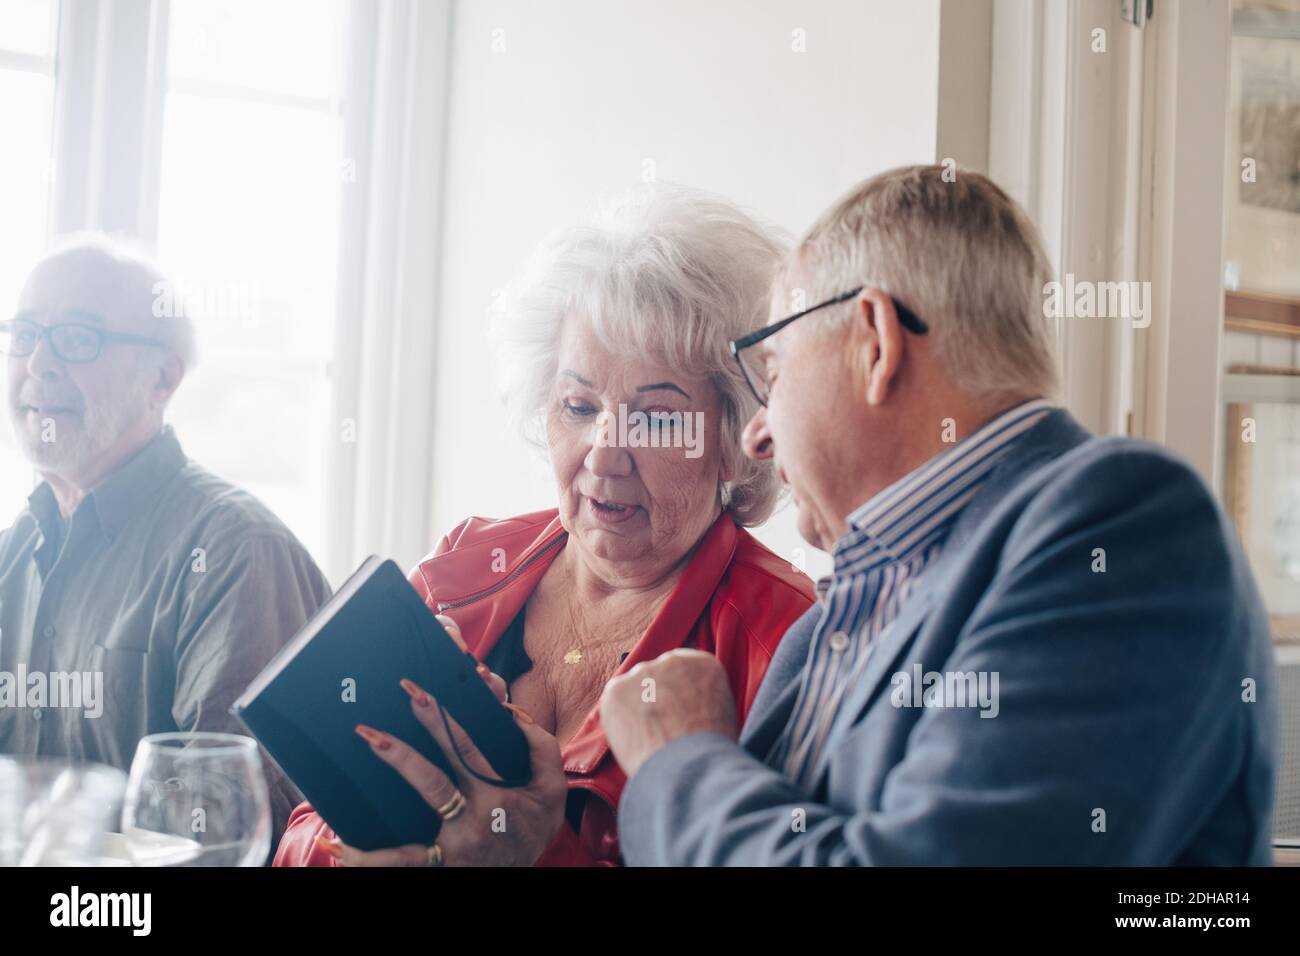 Senior woman talking to male friend while holding book in restaurant Stock Photo